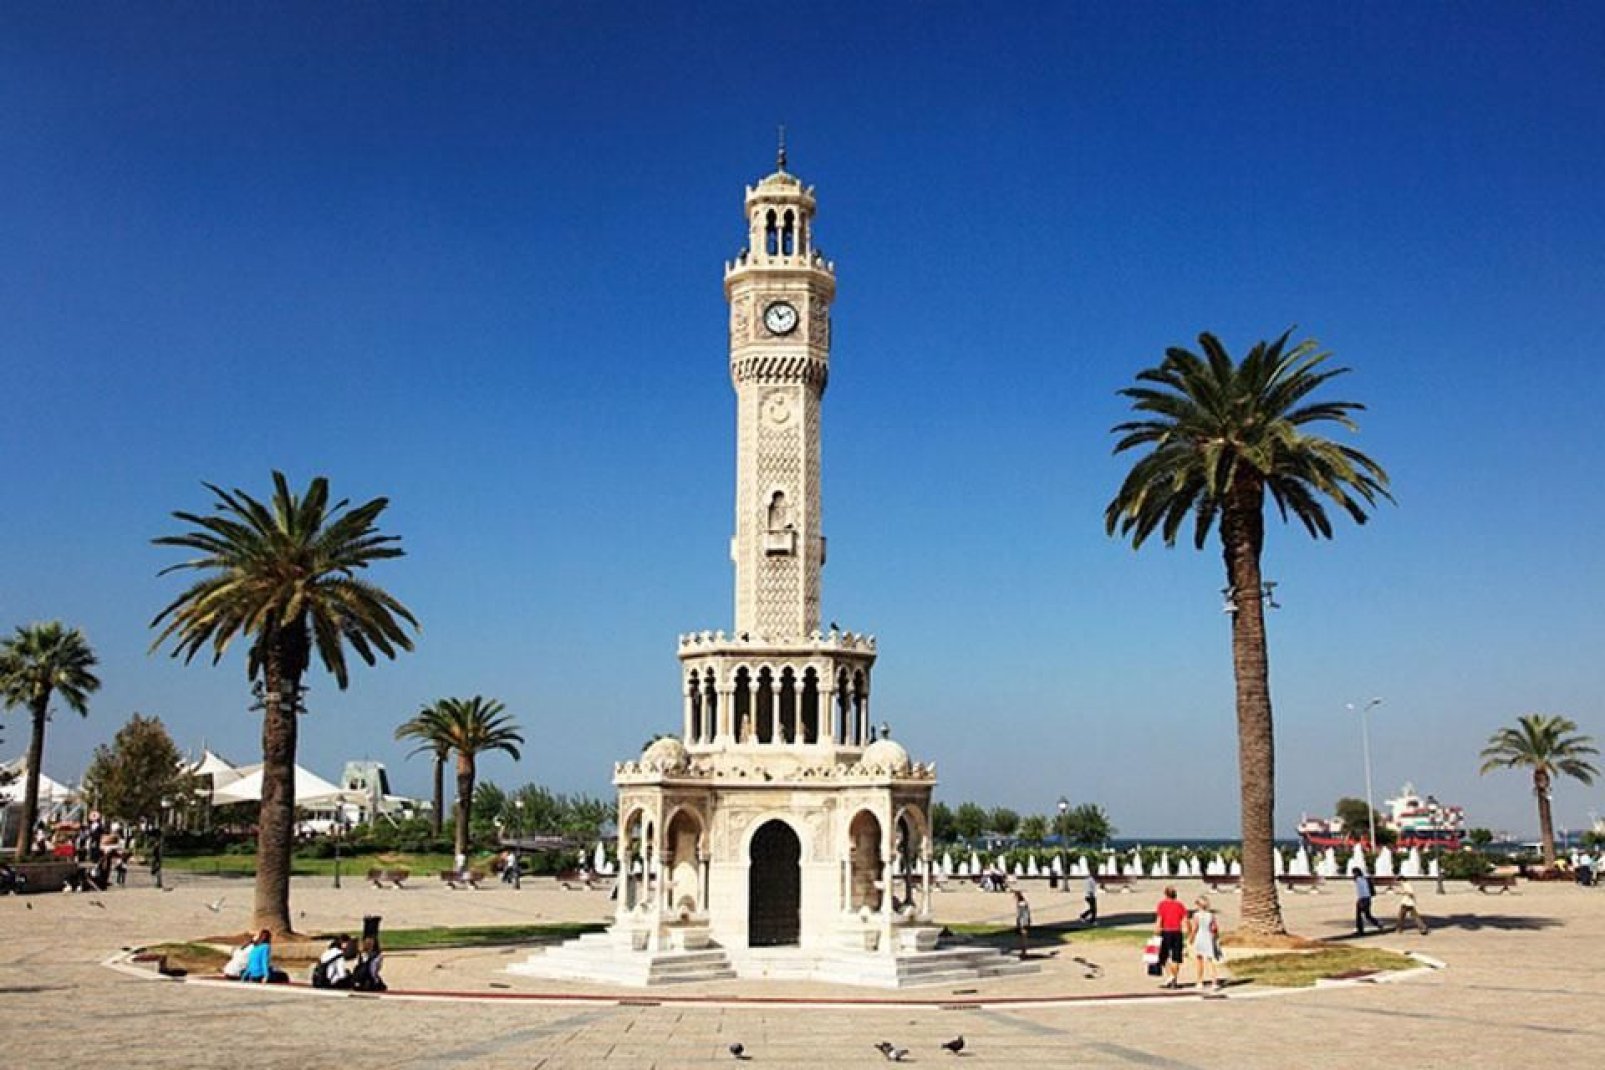 Nicknamed the pearl of the Aegean, Izmir is Turkey's third largest city but also boasts pristine coastline